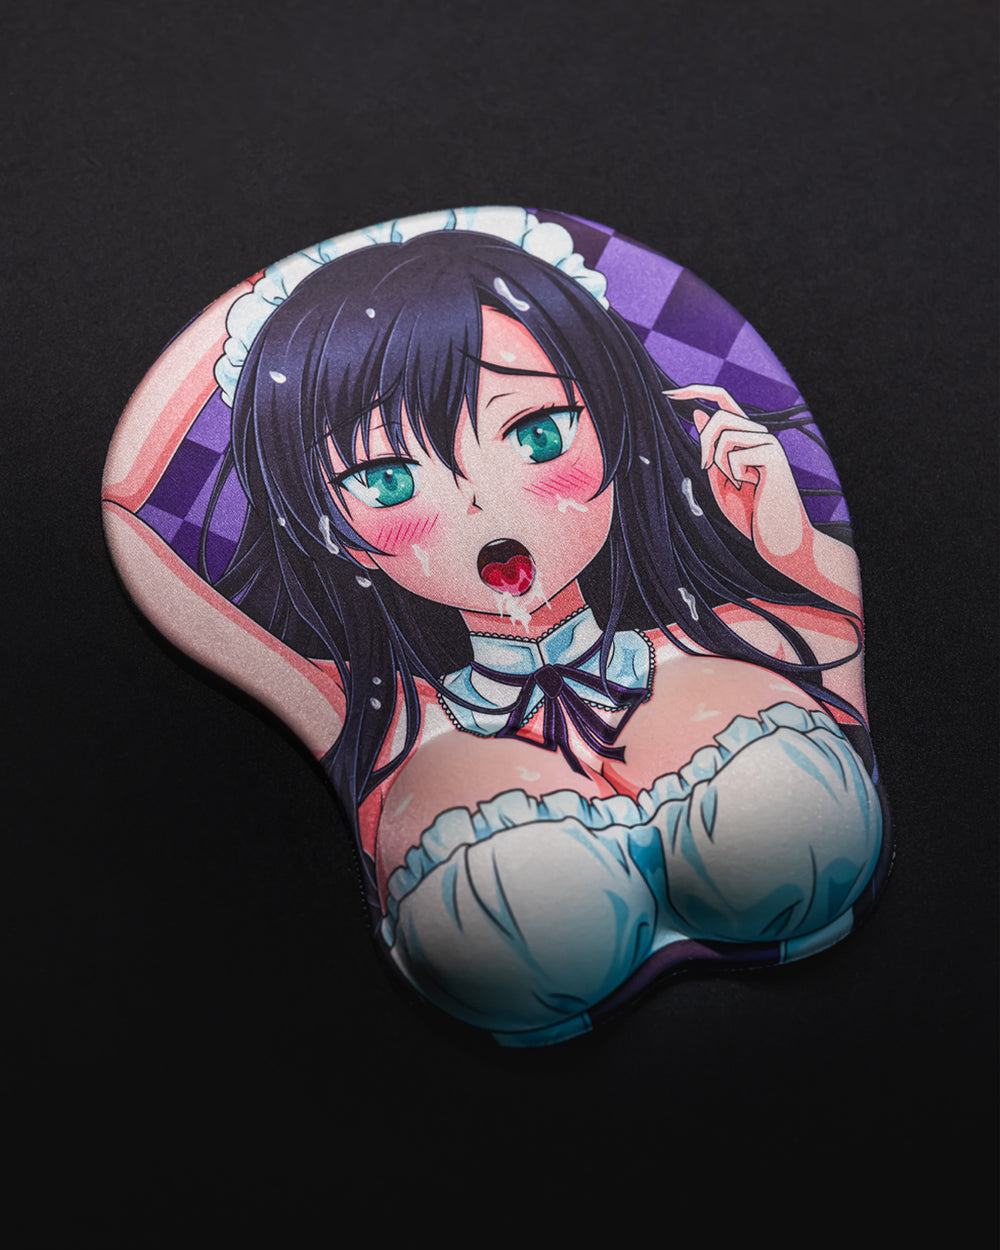 JUICY MAID MOUSE PAD